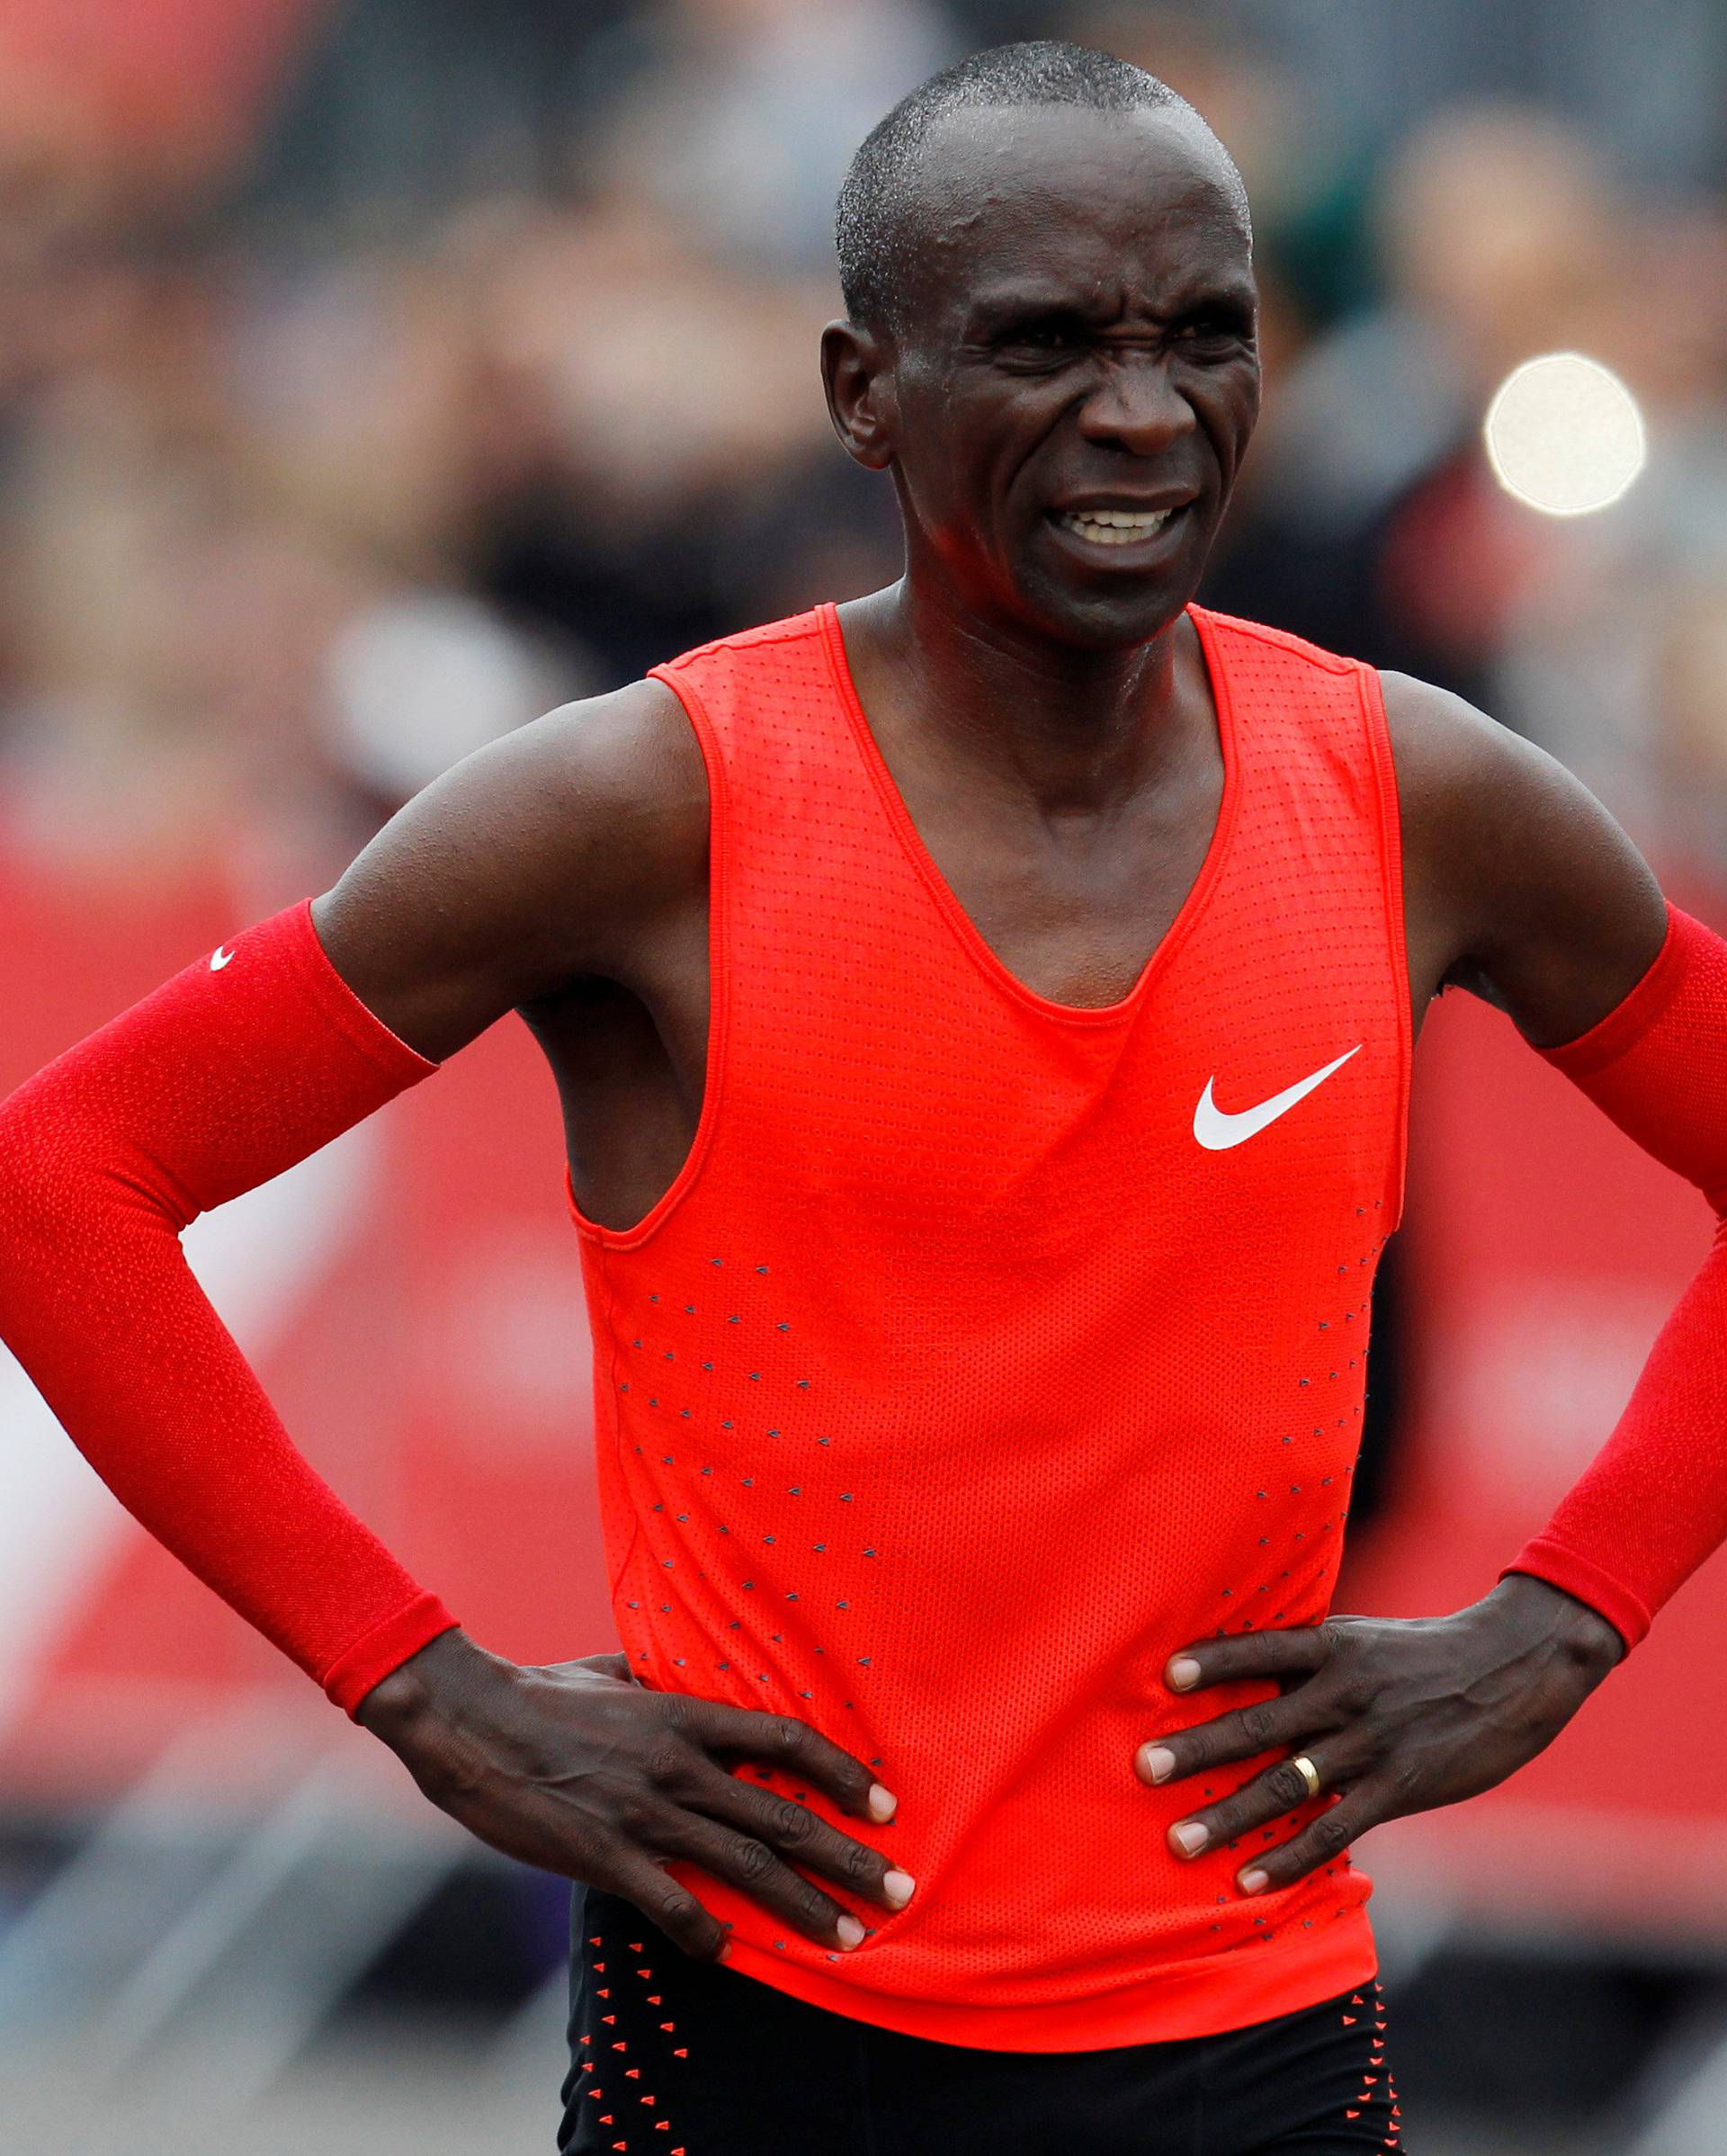 Kipchoge reacts after crossing  the finish line during an attempt to break the two-hour marathon barrier at the Monza circuit.